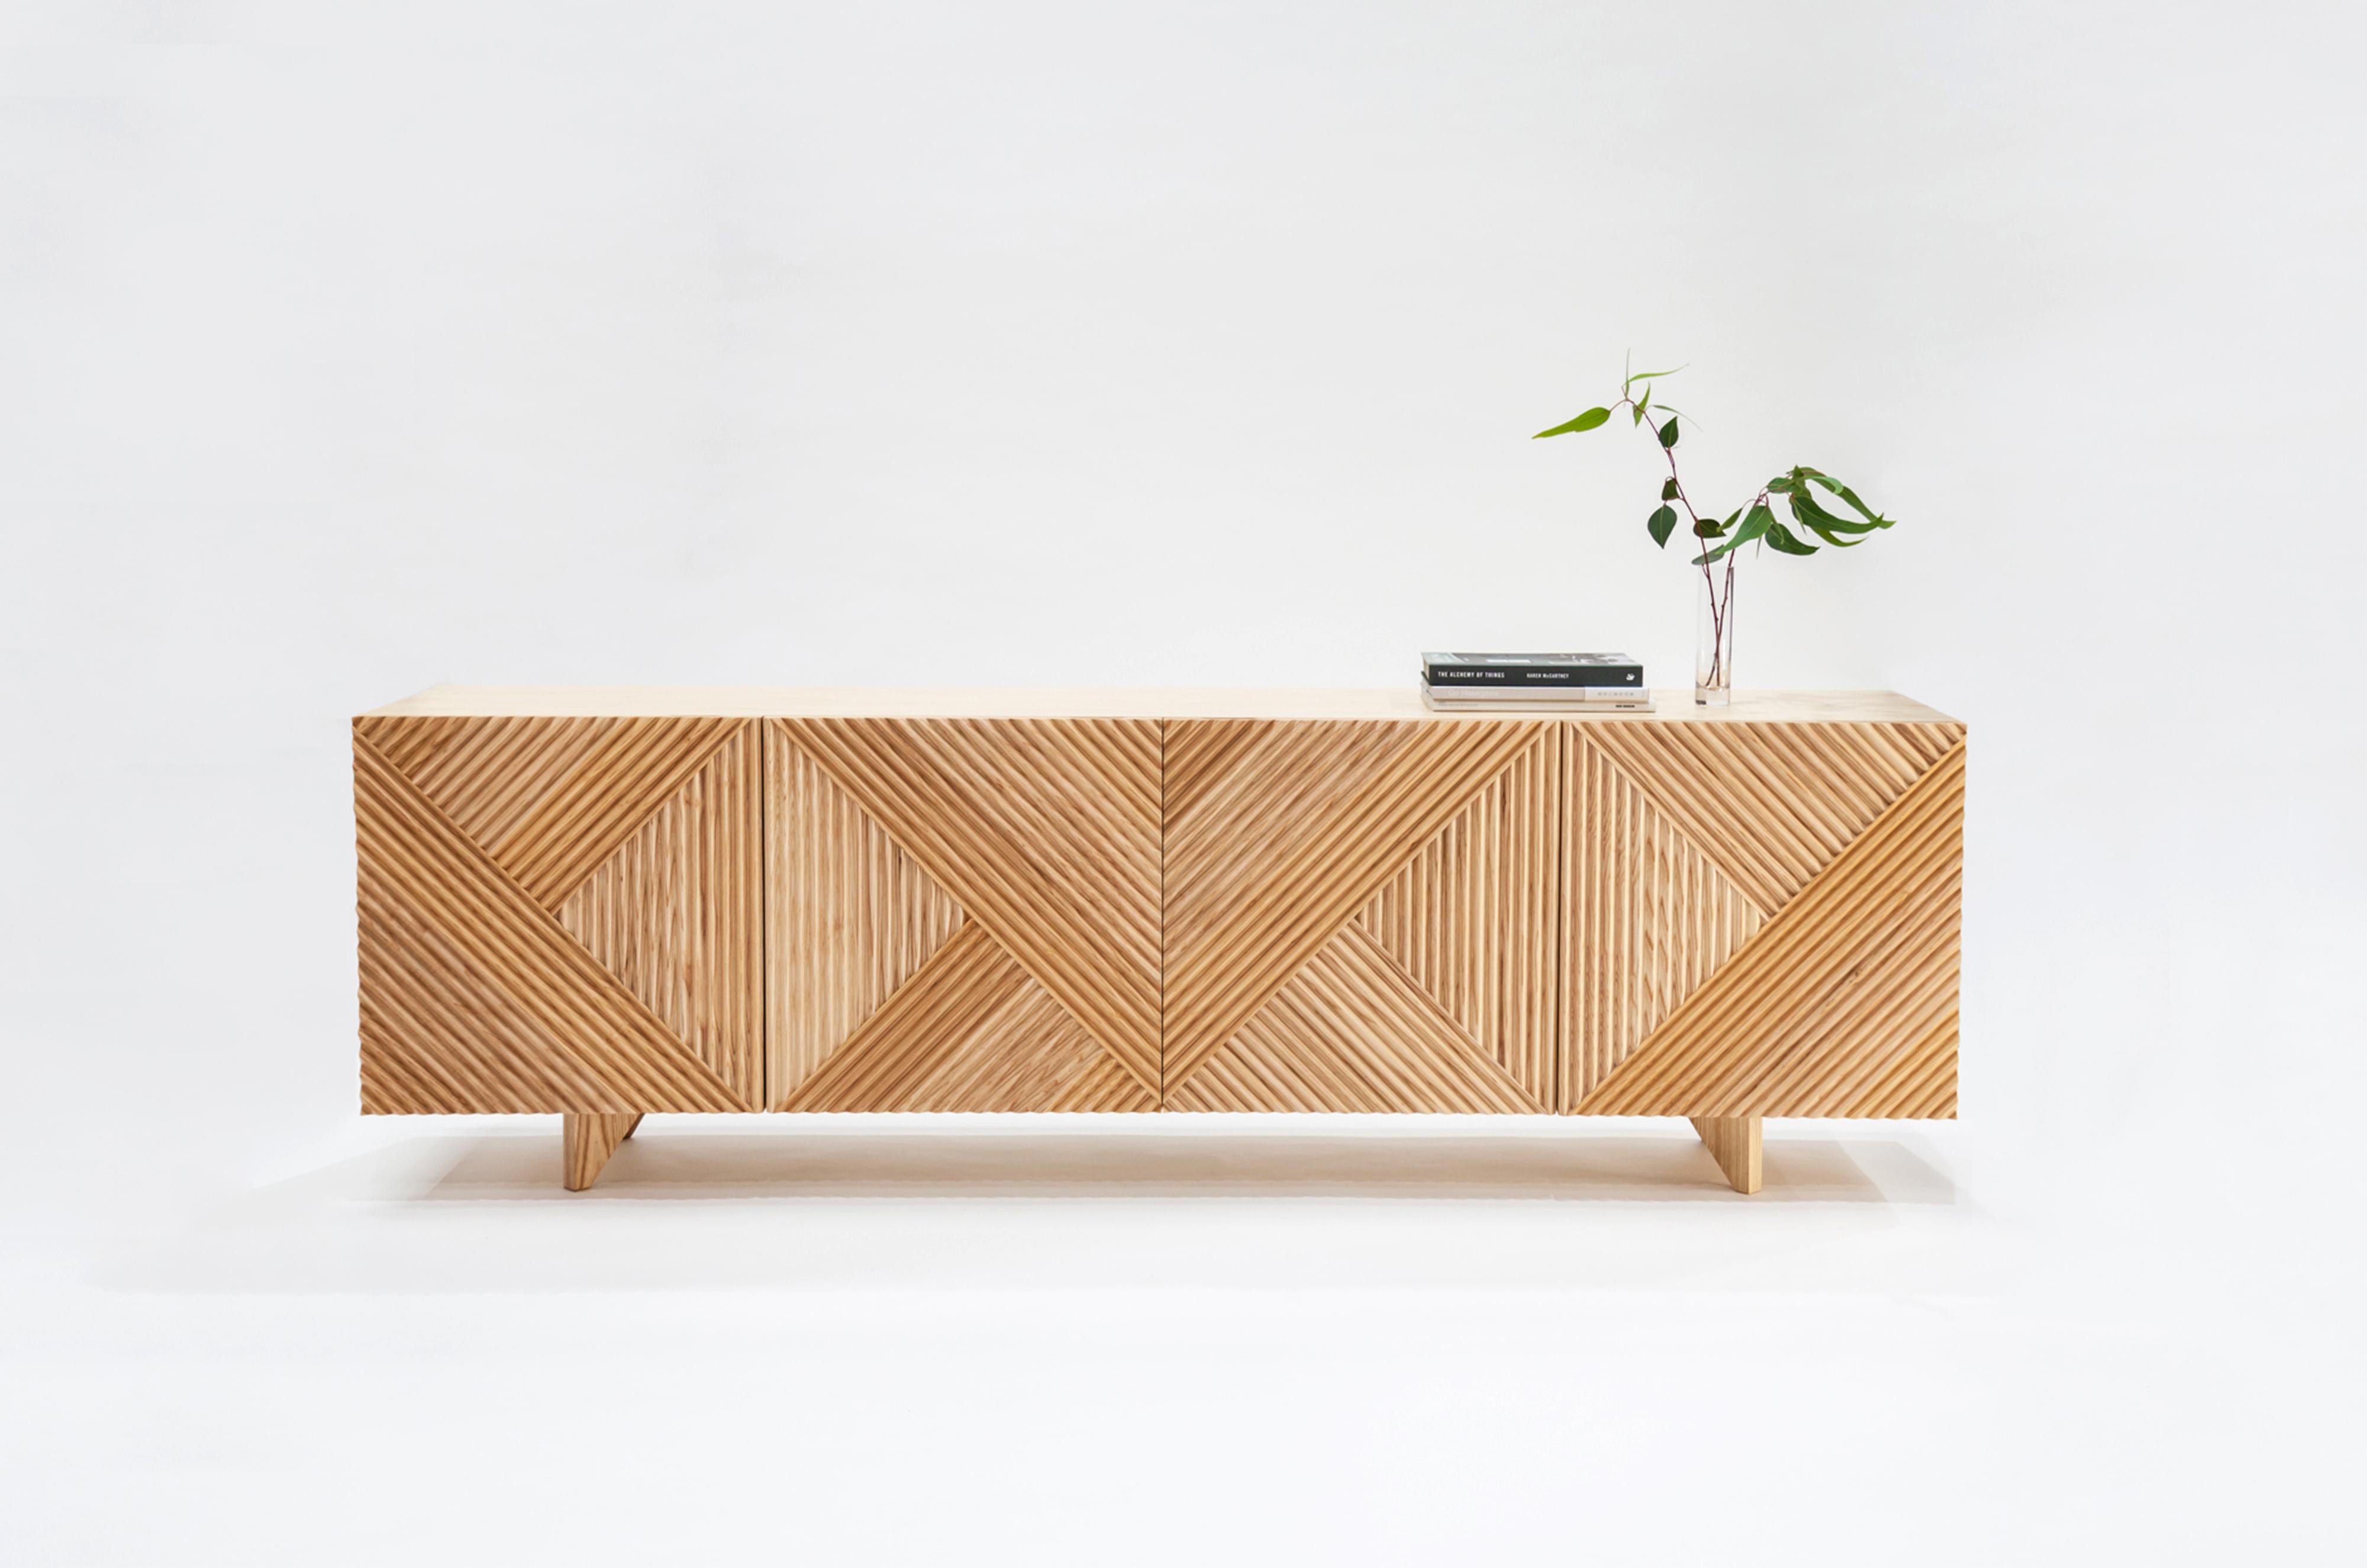 Ash Enzo sideboard by Rosanna Ceravolo
Dimensions: W 220 x D 46 x H 68 cm
Materials: Solid american ash fronts, polyurethane spray finish.
Also available in different dimensions and materials.


Rosanna Ceravolo is a Melbourne based architect